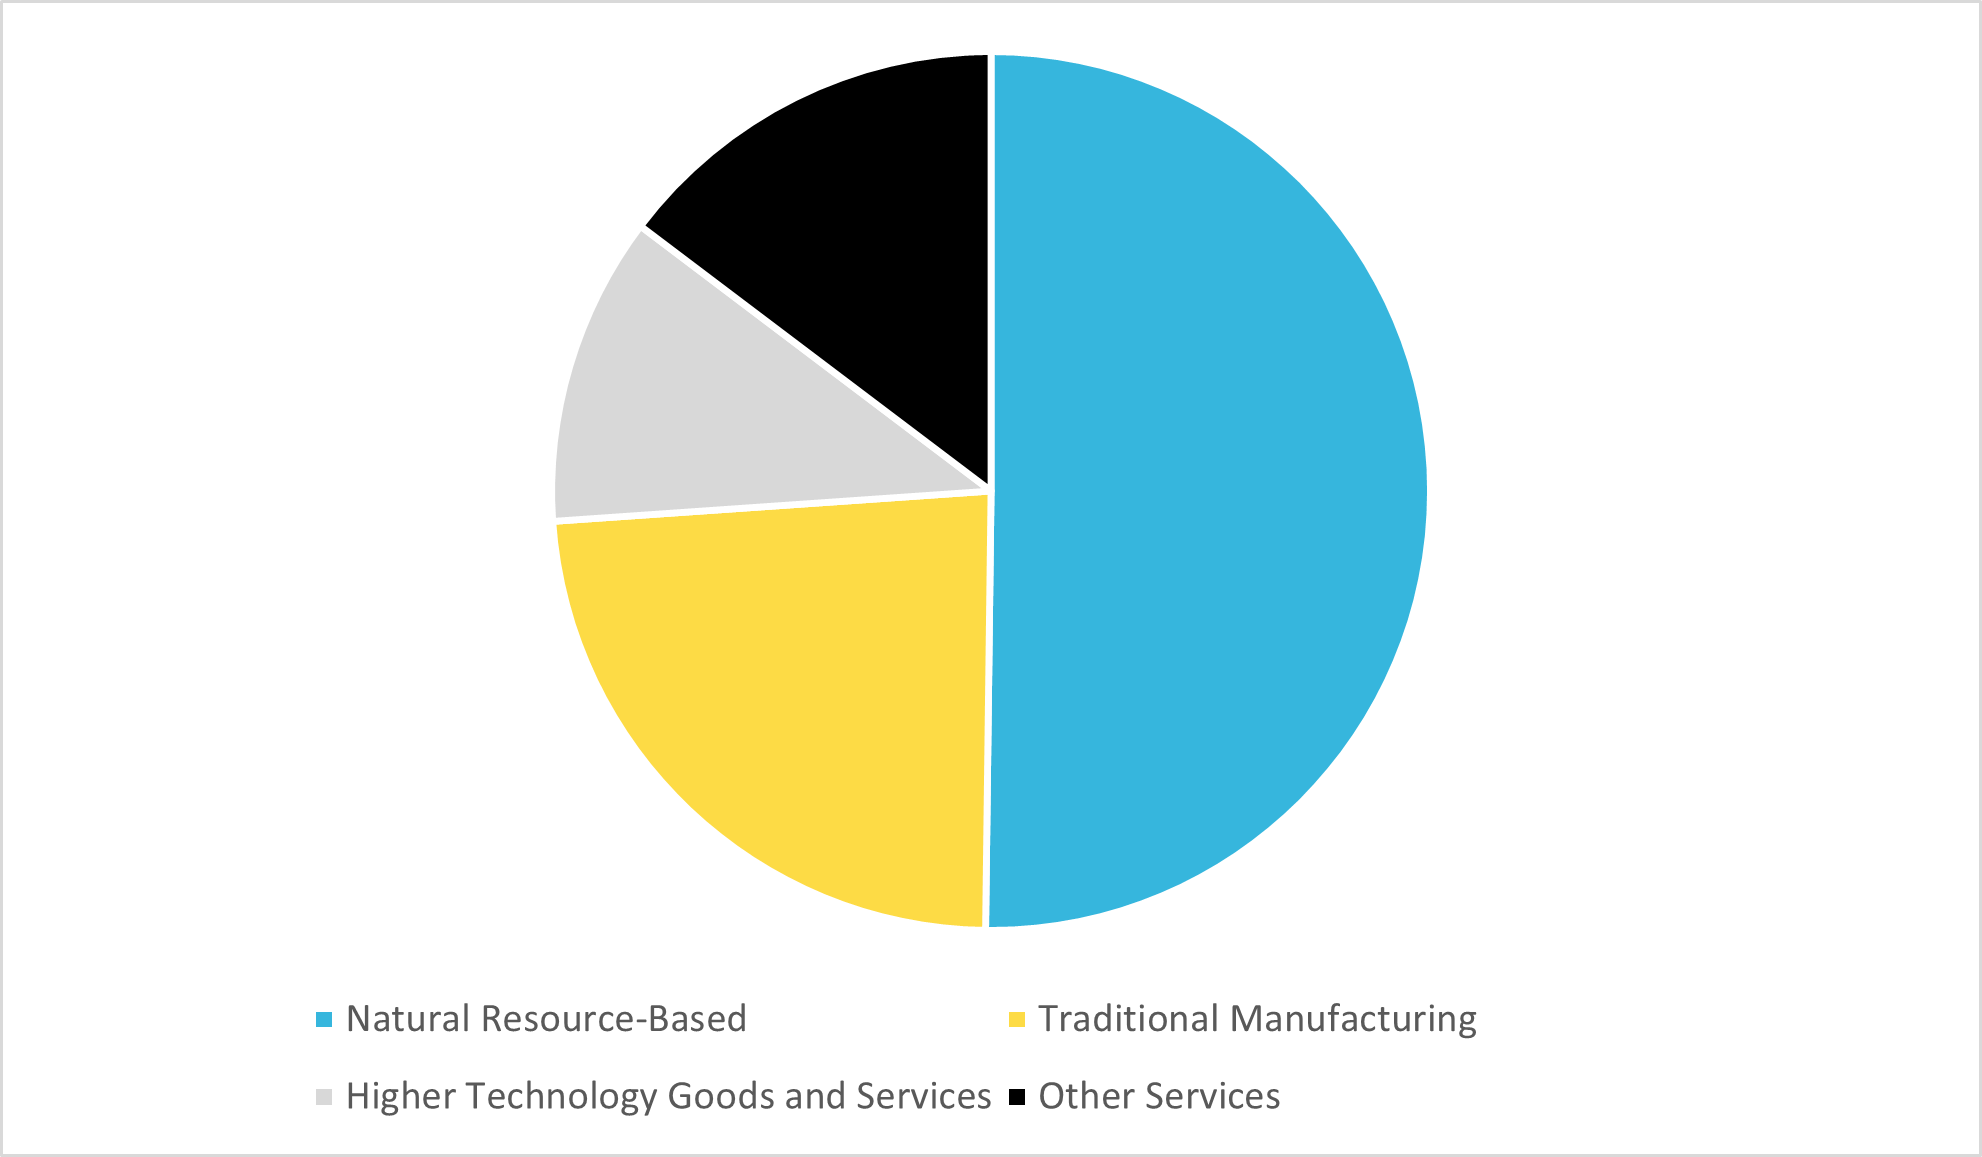  Figure 4 — Composition of Canadian goods and services exports, 2019 